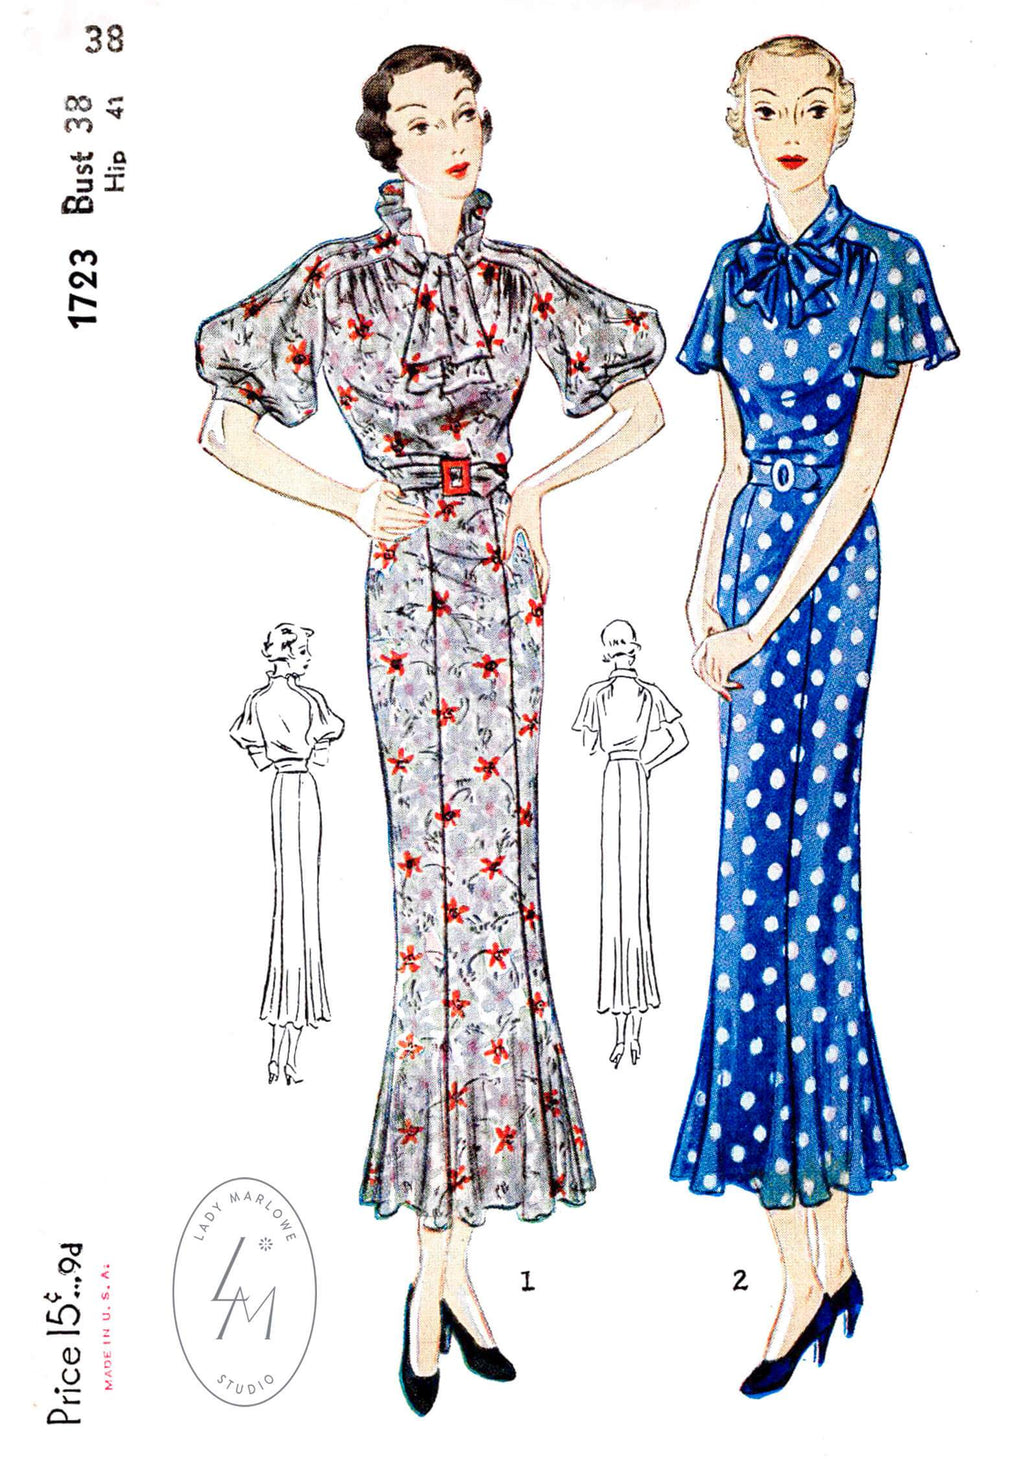 Simplicity 1723 1930s 1938 dress vintage sewing pattern reproduction